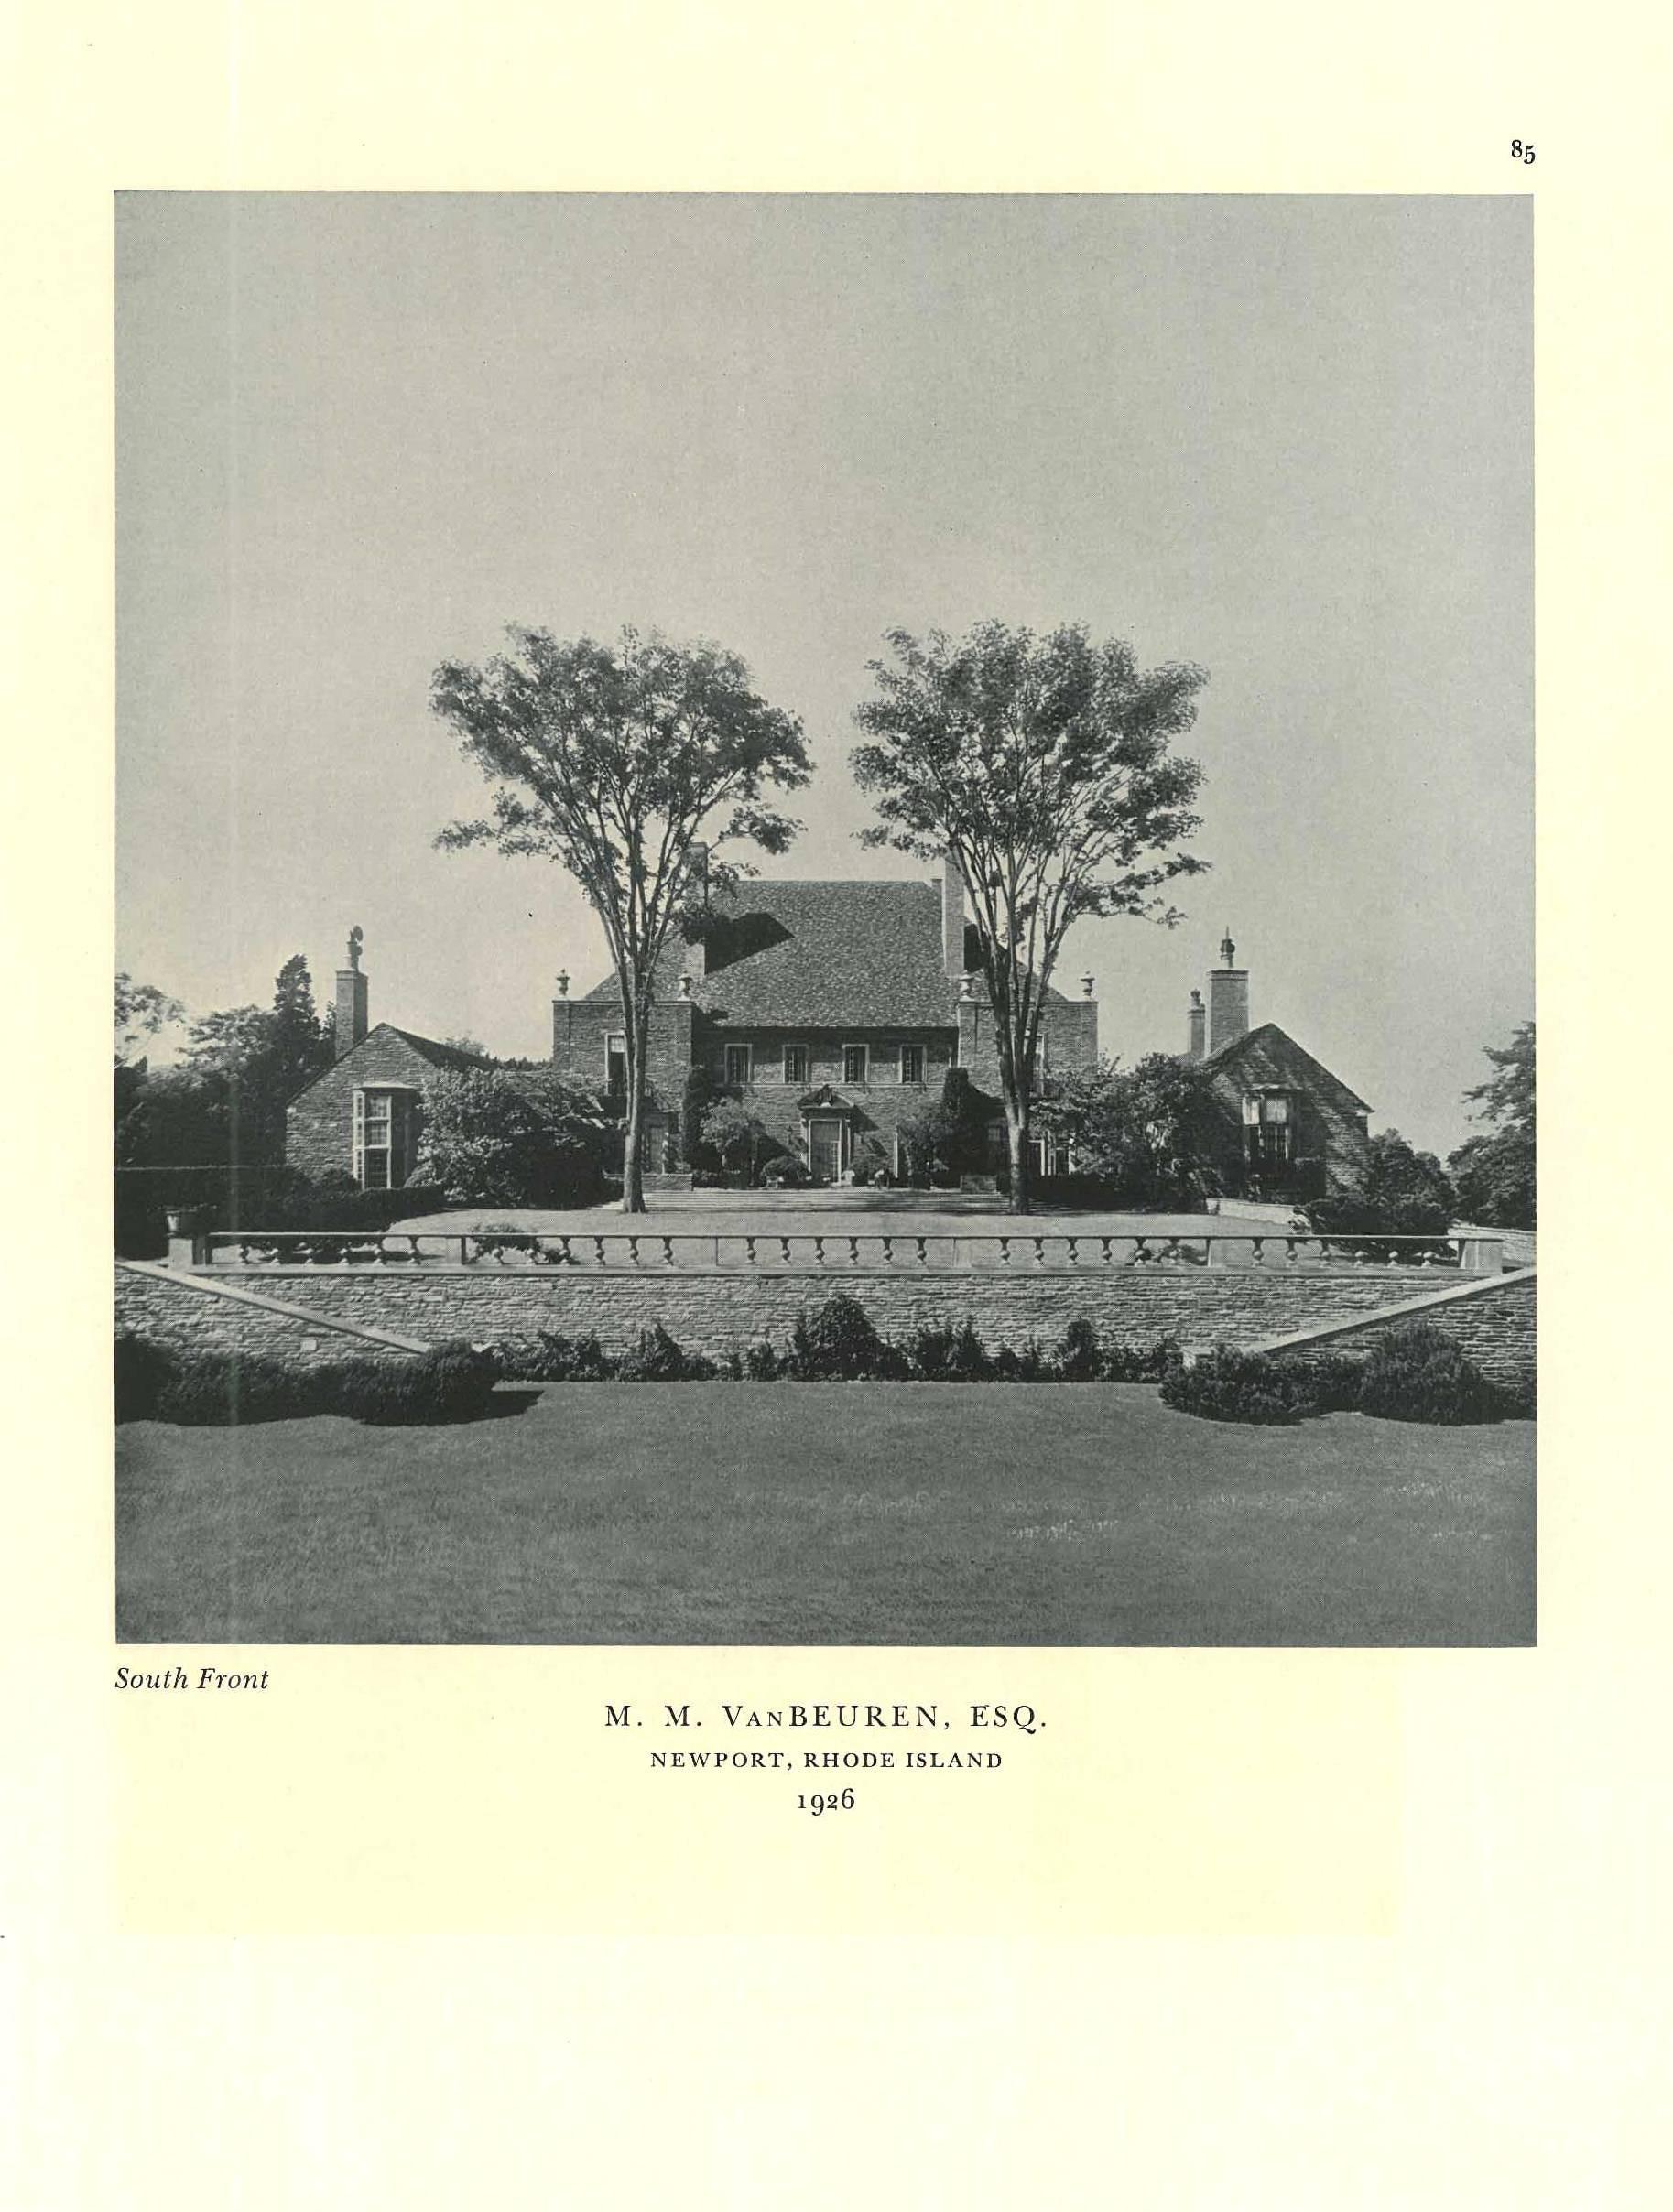 domestic architecture of h.t. lindeberg